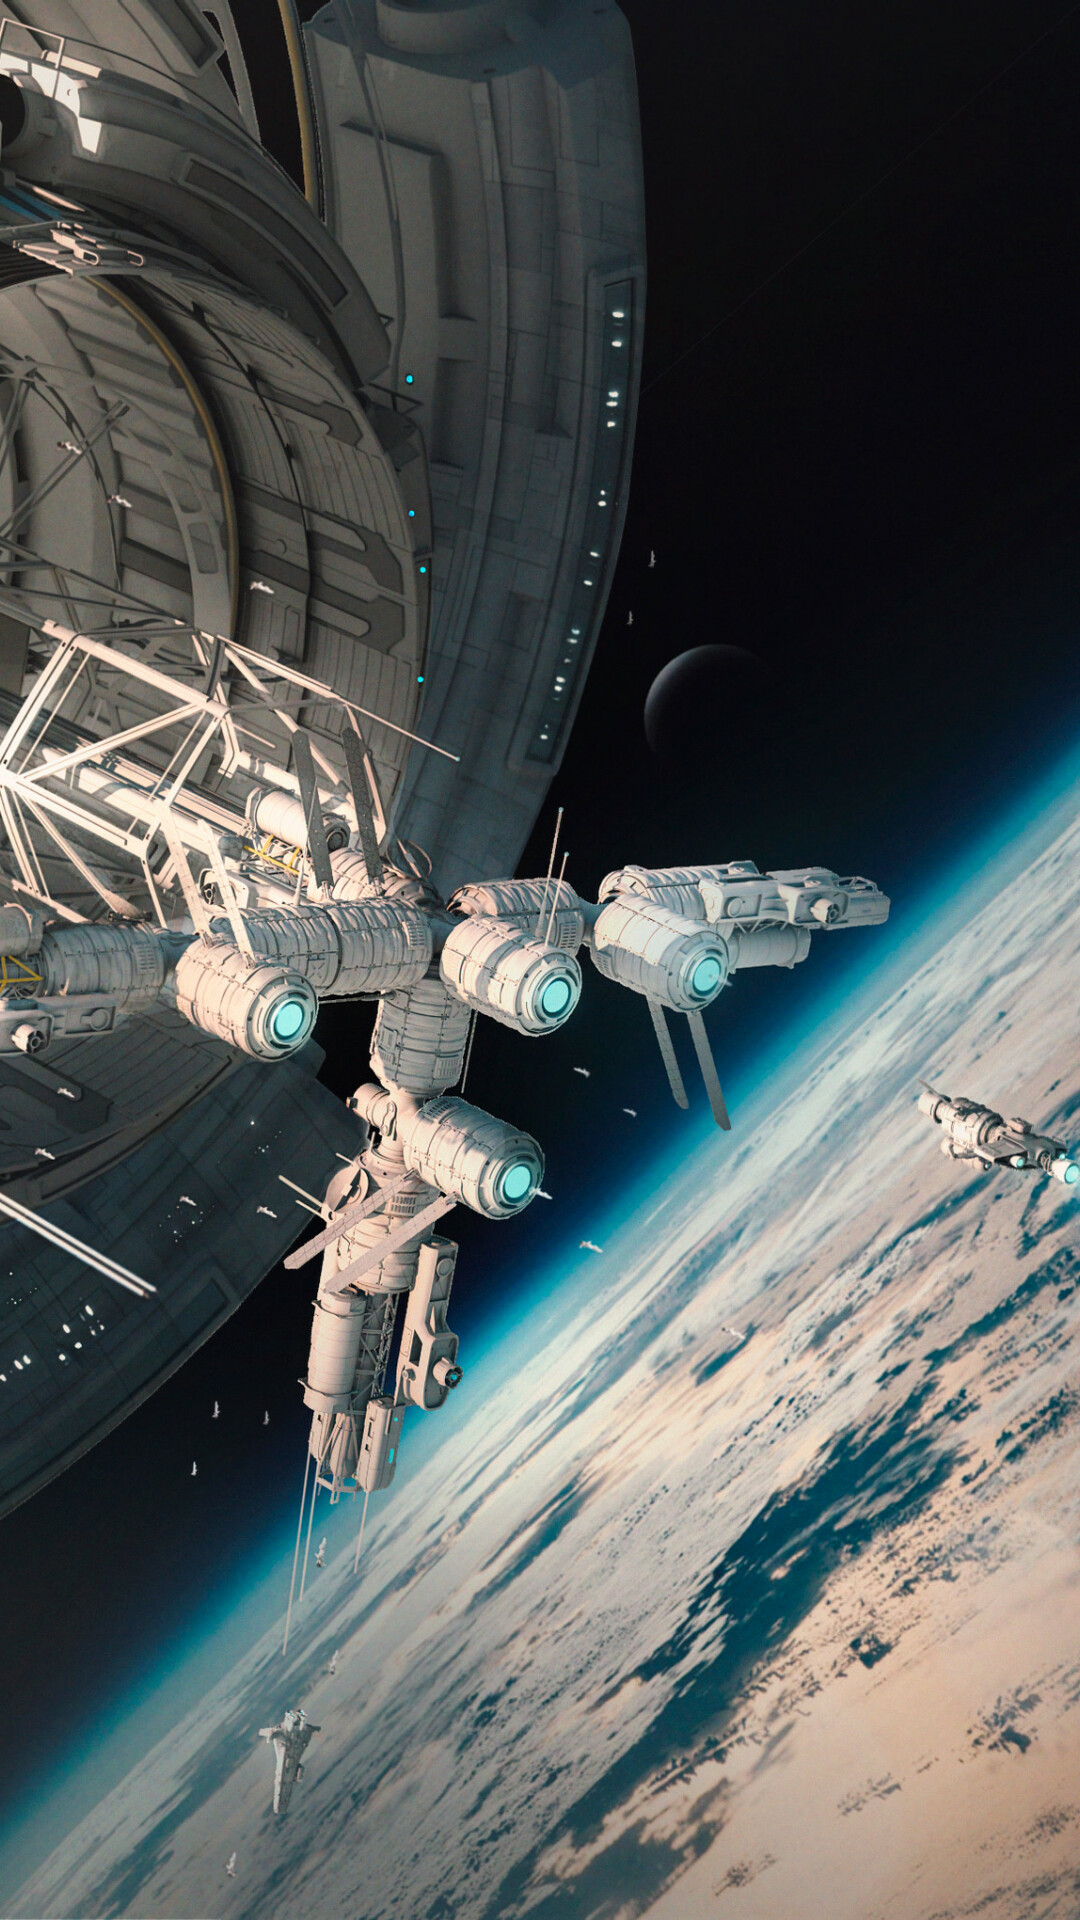 Space Station: An orbiting manned structure, Astral, Solar System, Interstellar. 1080x1920 Full HD Wallpaper.